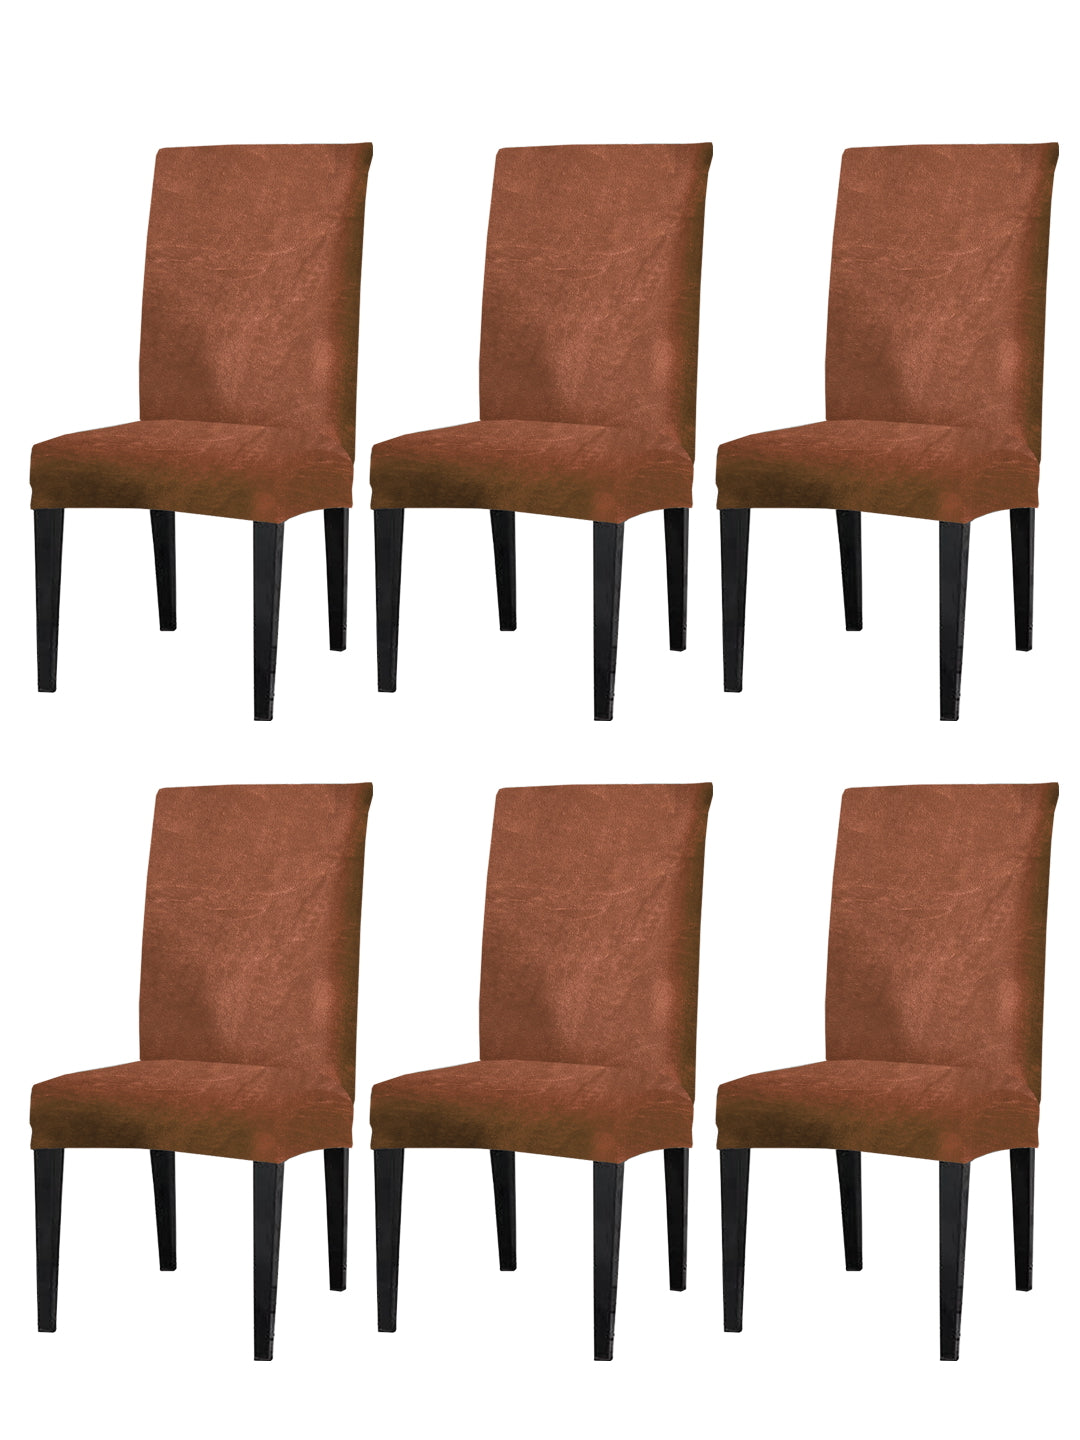 Pack of 6 Velvet Dining Chair Covers - Brown